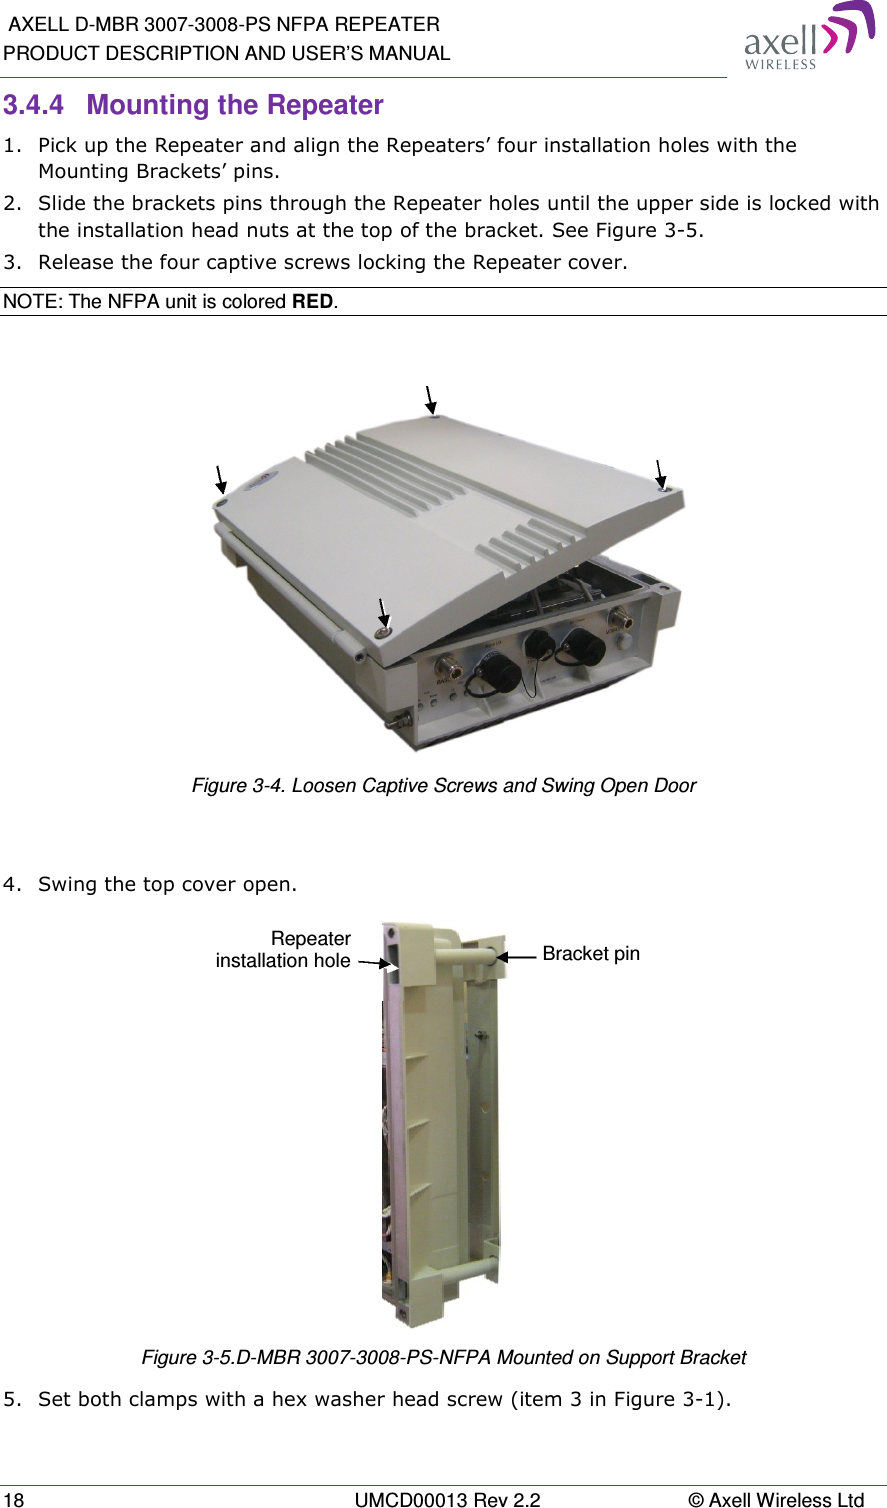  AXELL D-MBR 3007-3008-PS NFPA REPEATER PRODUCT DESCRIPTION AND USER’S MANUAL 18  UMCD00013 Rev 2.2  © Axell Wireless Ltd 3.4.4  Mounting the Repeater 1.  Pick up the Repeater and align the Repeaters’ four installation holes with the Mounting Brackets’ pins. 2.  Slide the brackets pins through the Repeater holes until the upper side is locked with the installation head nuts at the top of the bracket. See Figure 3-5. 3.  Release the four captive screws locking the Repeater cover. NOTE: The NFPA unit is colored RED.    Figure 3-4. Loosen Captive Screws and Swing Open Door  4.  Swing the top cover open.  Figure 3-5.D-MBR 3007-3008-PS-NFPA Mounted on Support Bracket 5.  Set both clamps with a hex washer head screw (item 3 in Figure 3-1). Bracket pin Repeater installation hole 